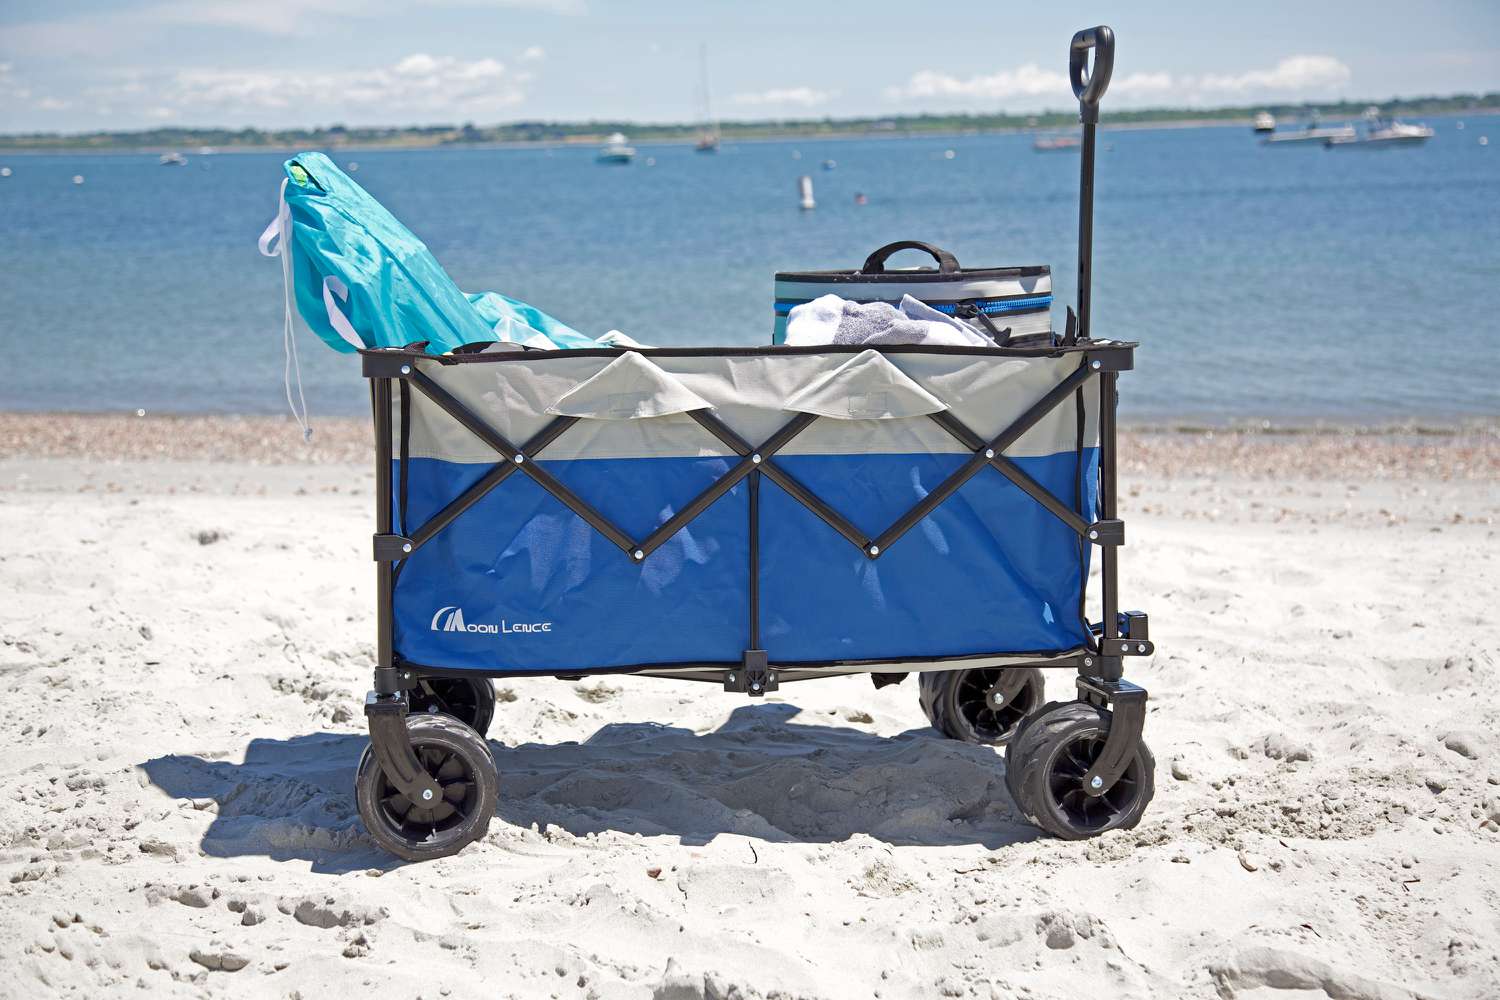 Moon Lence Collapsible Outdoor Utility Wagon sitting on sand